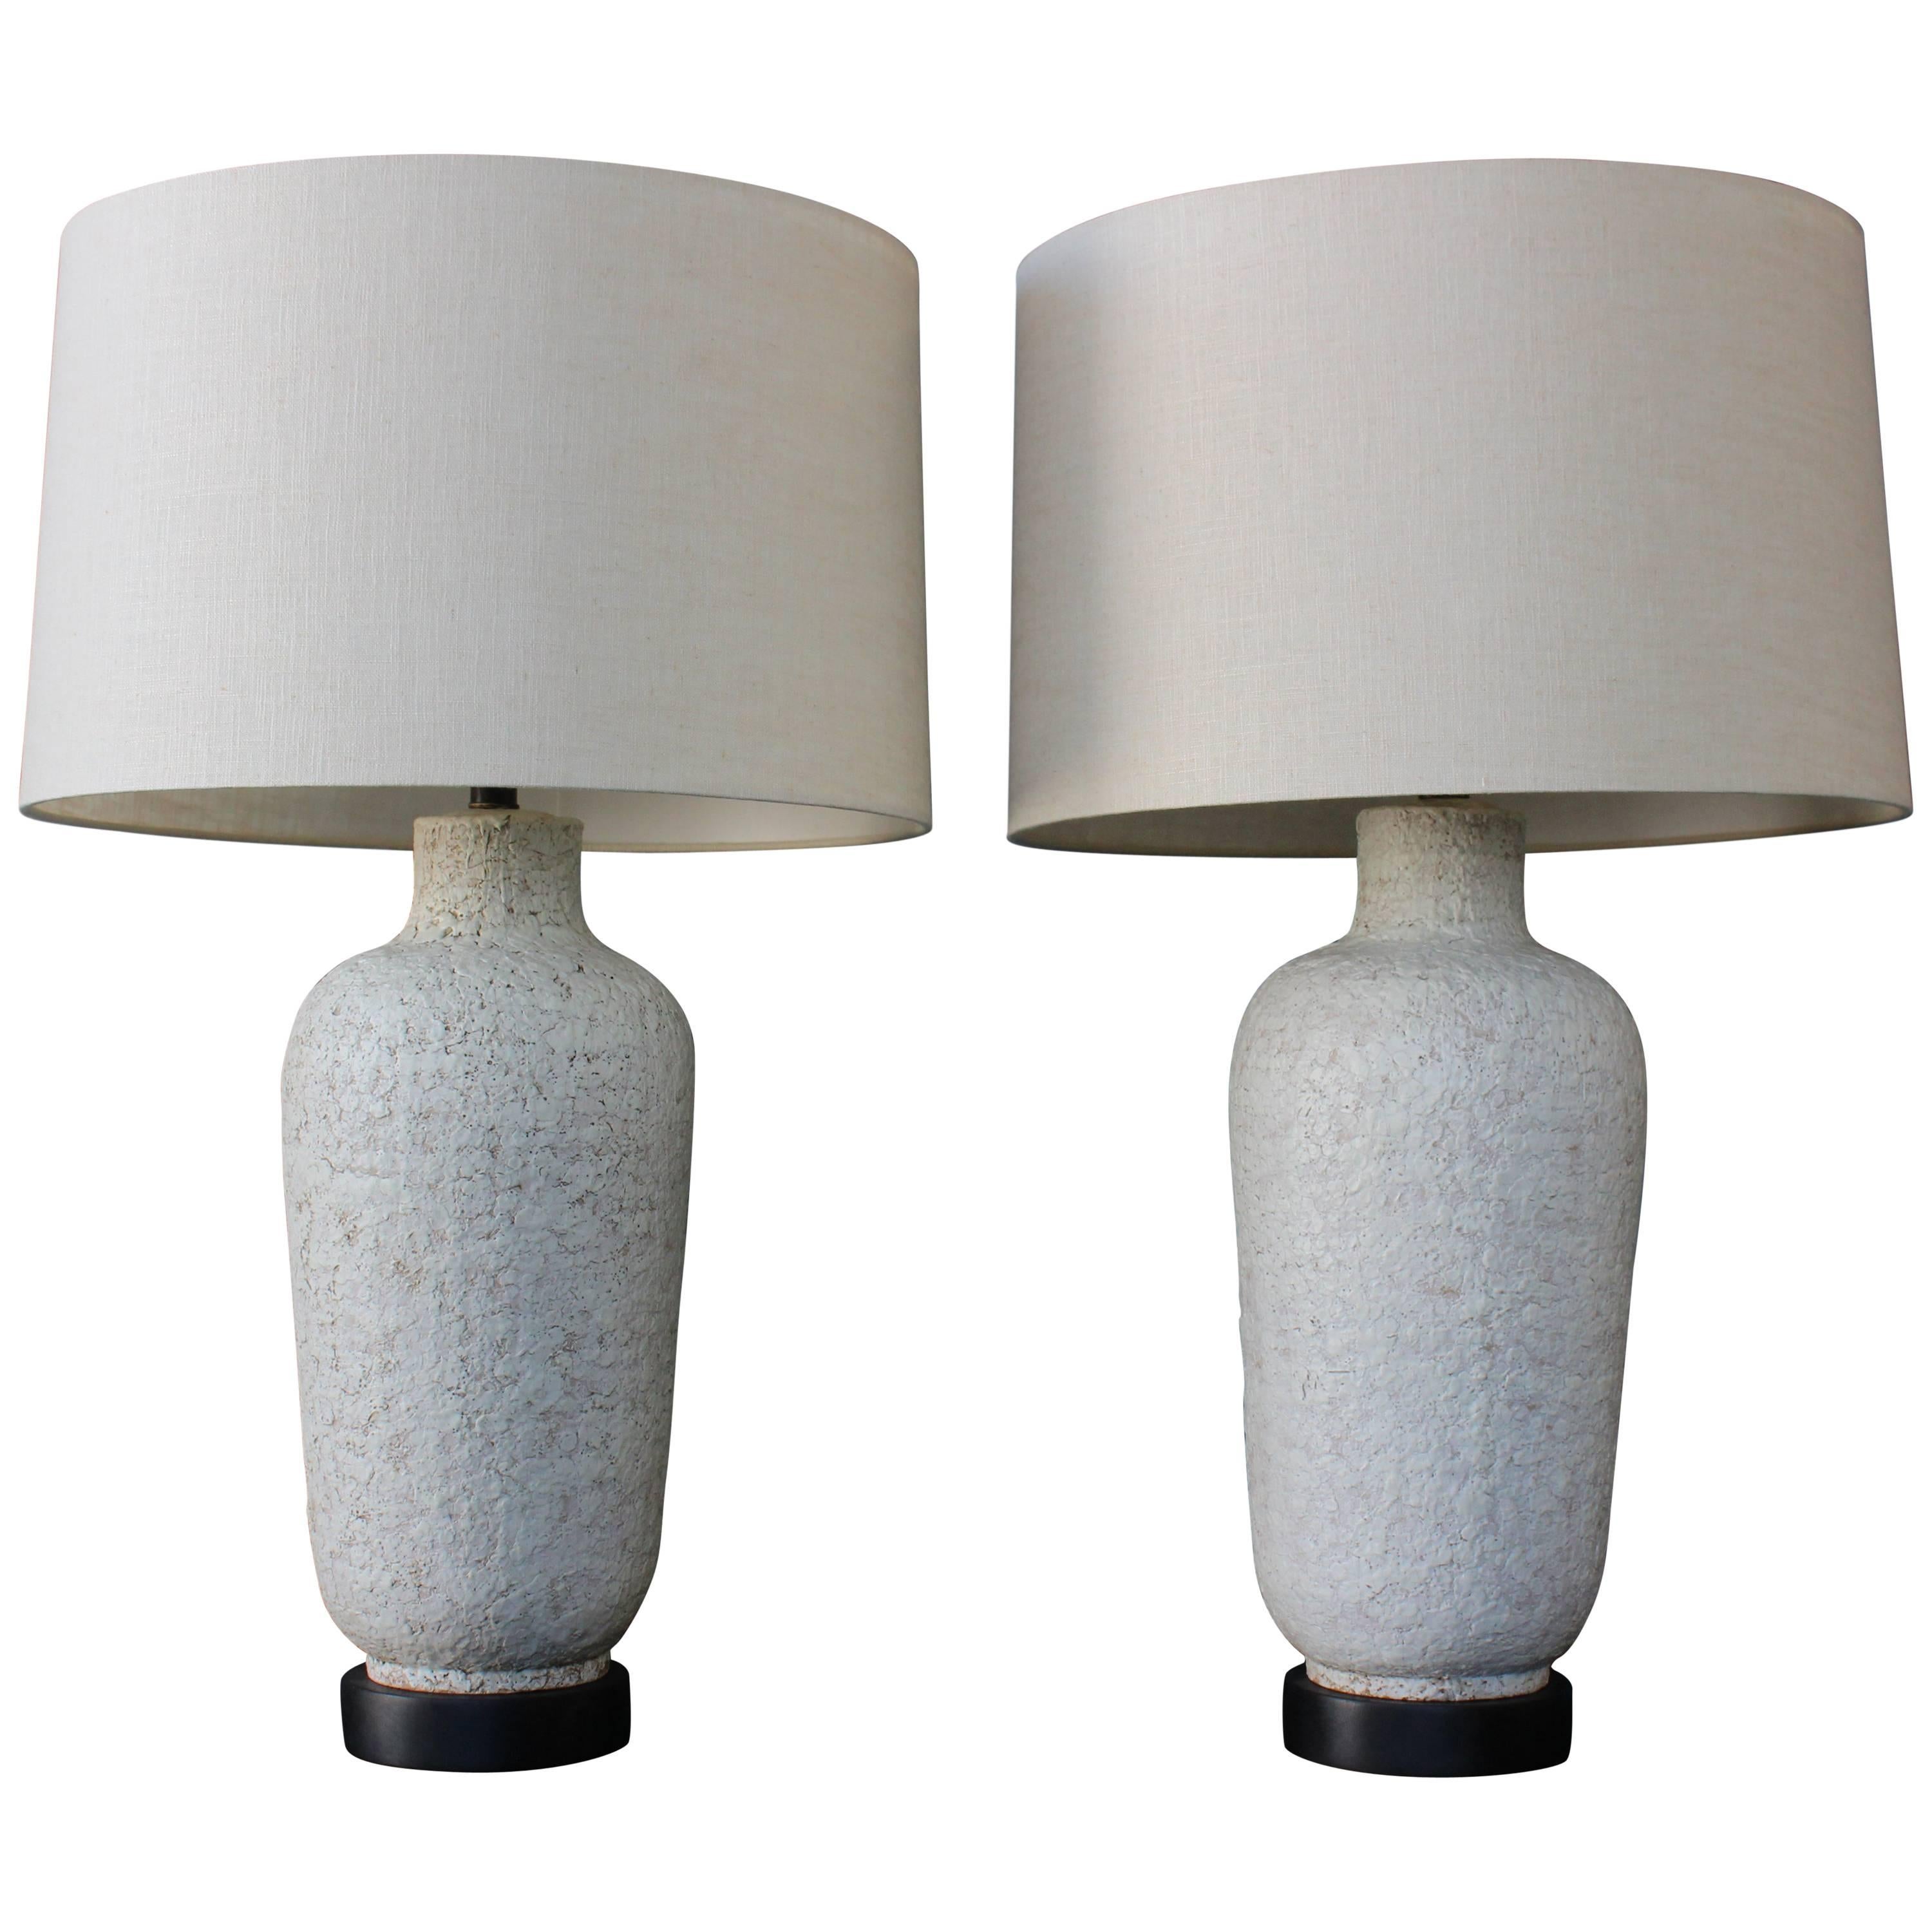 Pair of 1950s Lamps with a Heavy Texture Glaze